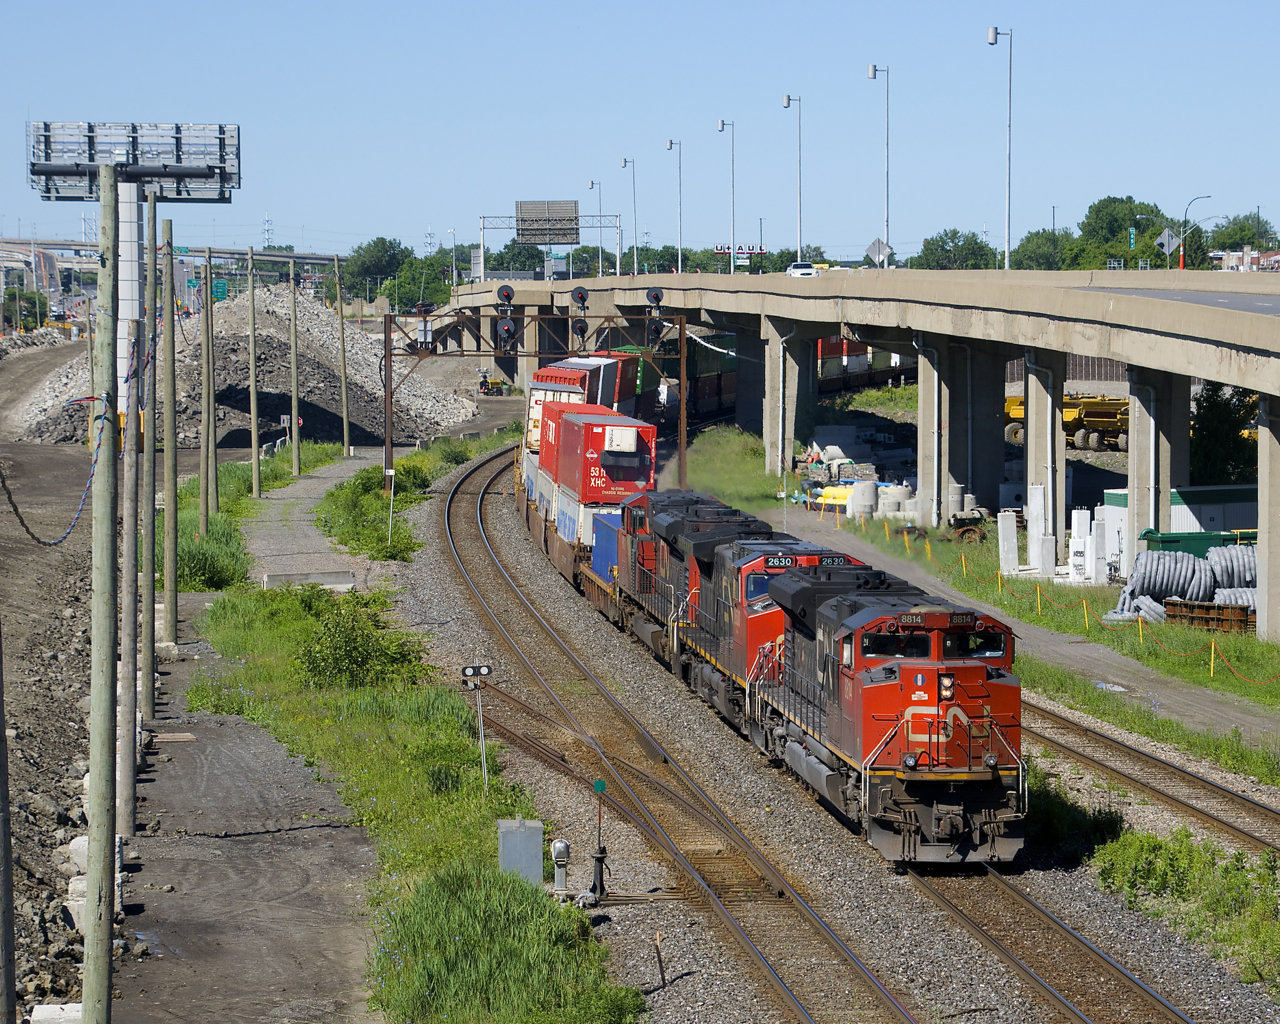 Up until around the end of 2017, the westbound lanes of autoroute 20 would be visible in the upper right of this scene, with the eastbound lanes at right, but the westbound lanes have since been demolished and shifted a bit further north. Here CN 120 swings under the eastbound lanes (which I will believe will move as well) with CN 8814, CN 2630 & CN 8812 up front and CN 2239 mid-train. Beside the head end power the switch is still in place for the Lachine Spur, though the spur has been pulled up since the end of 2015.